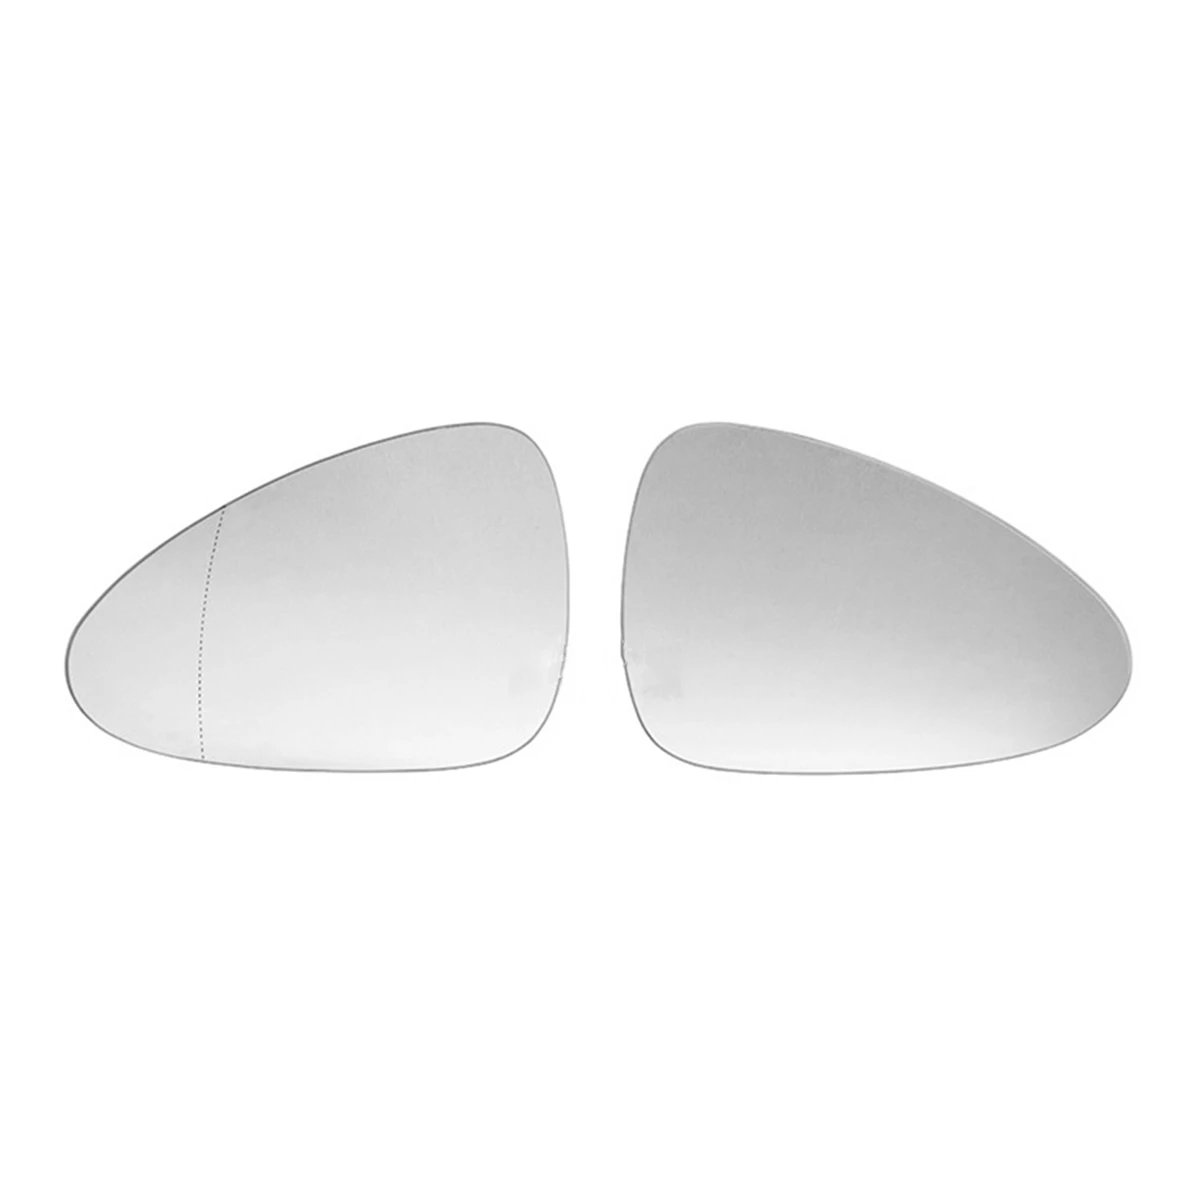 

2Pcs Door Wing Side Mirror Glass Heated with Backing Plate for -Porsche Panamera 2010-2016 97073103505 97073103809 L+R